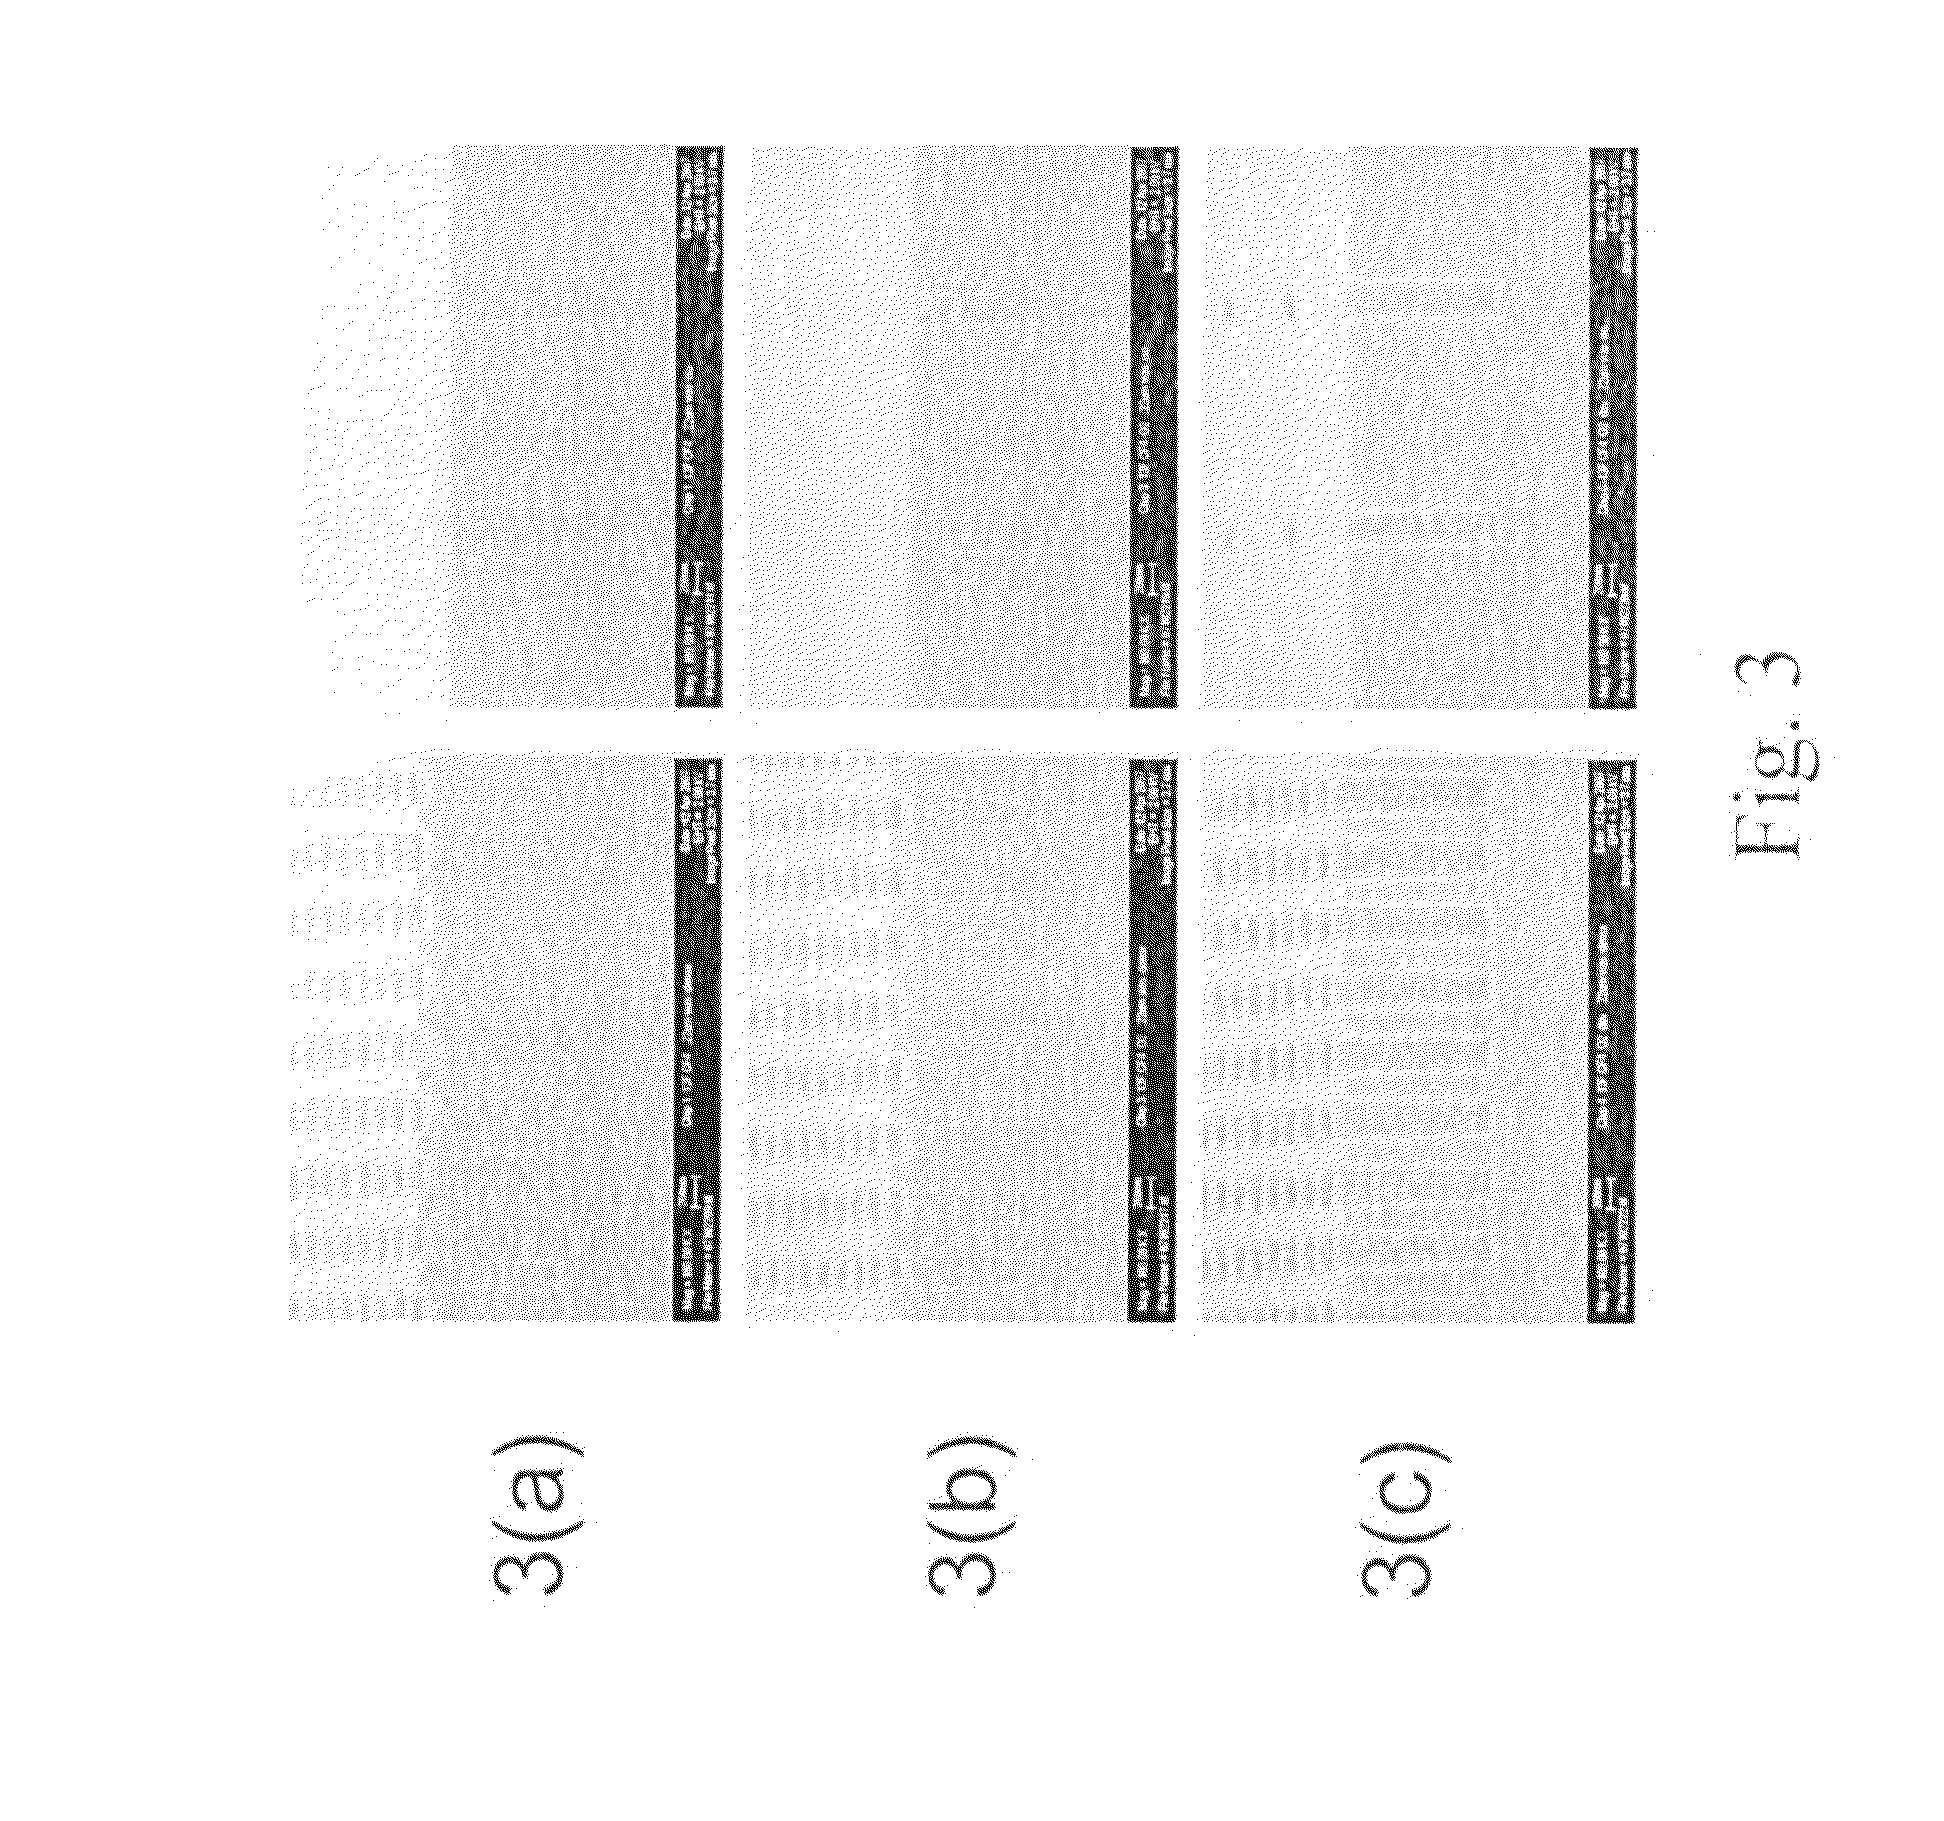 Non-covalently crosslinkable materials for photolithography processes